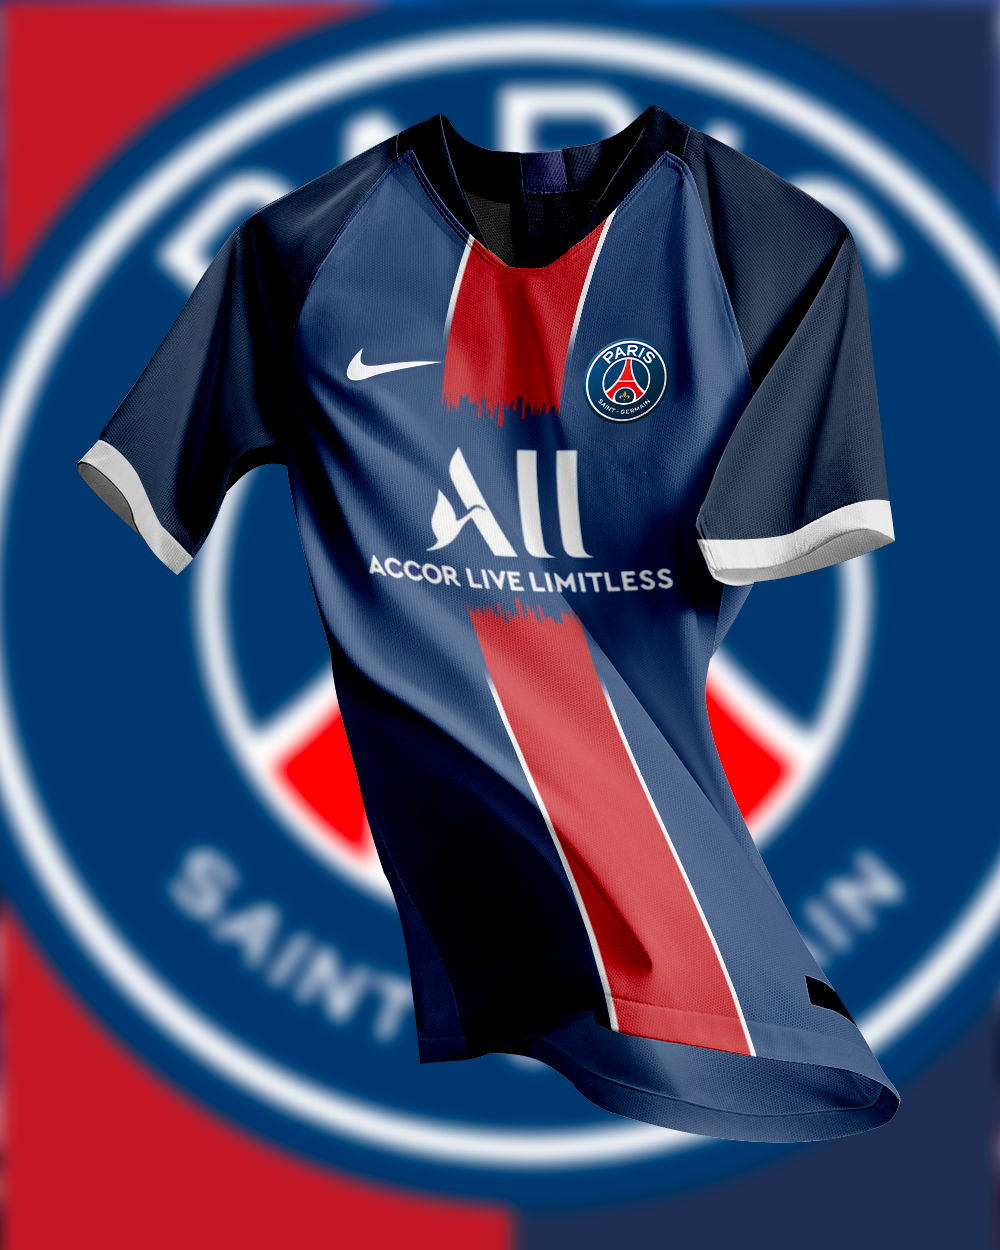 Nike-concept-psg.png